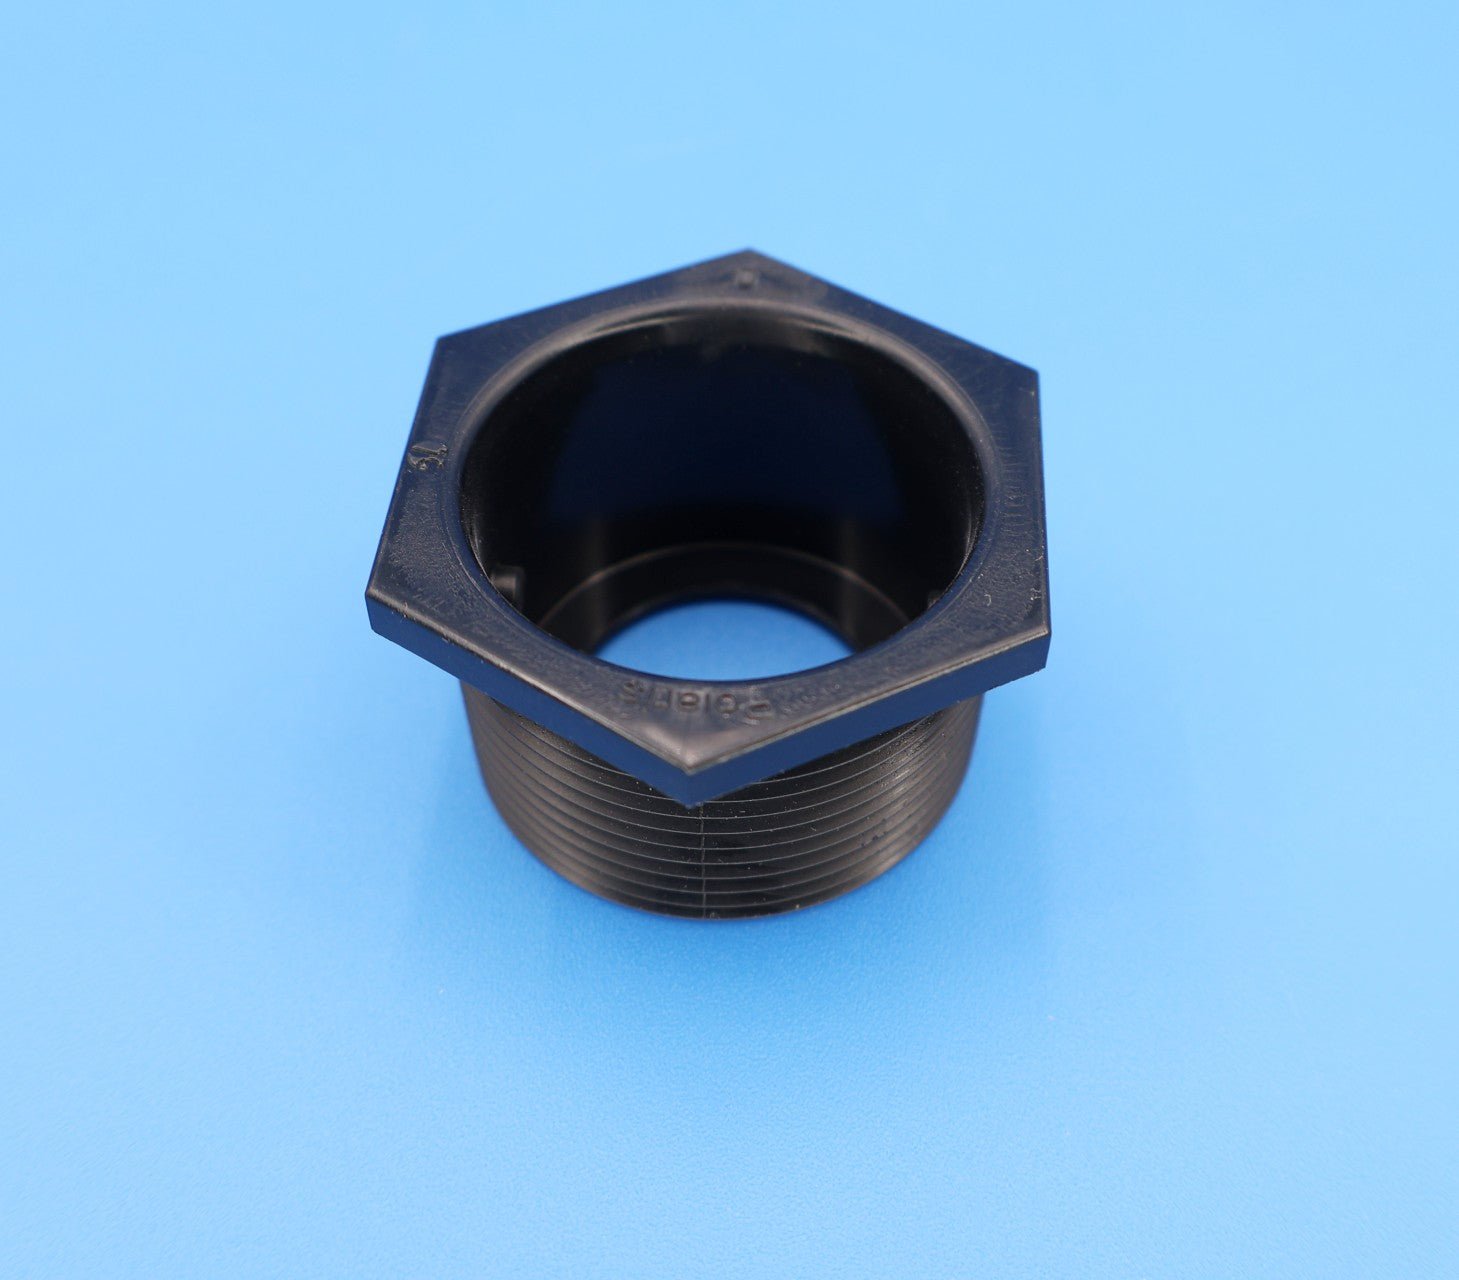 Jandy (Polaris) 3900 Sport Black Universal Wall Fitting 6-550-00 - Cleaner Parts - img-1